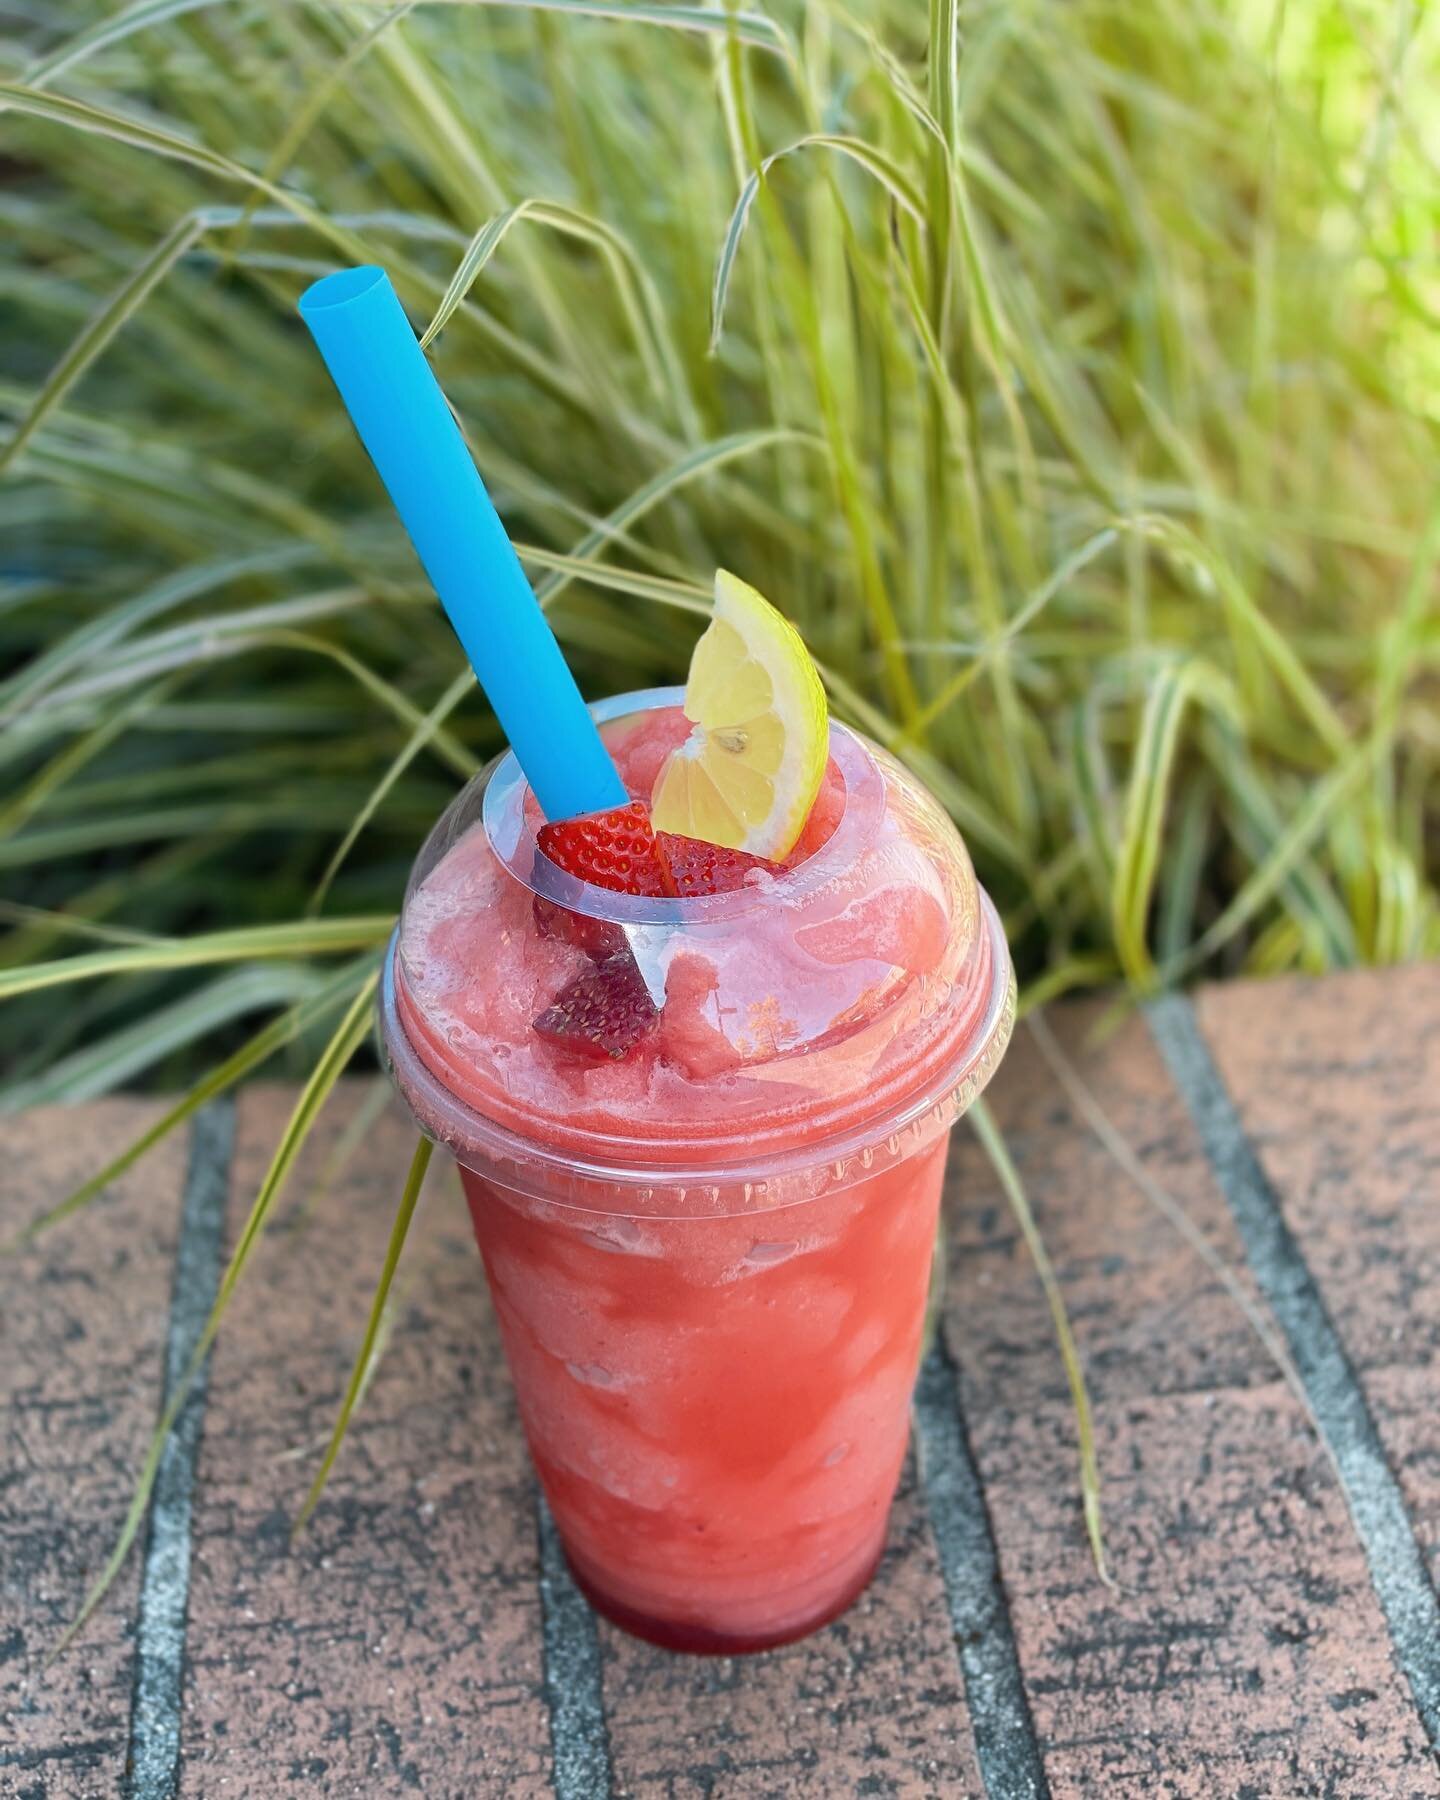 McBees Frozen Strawberry Lemonade just in time. #mcbees #lemonade #shakes #crepes